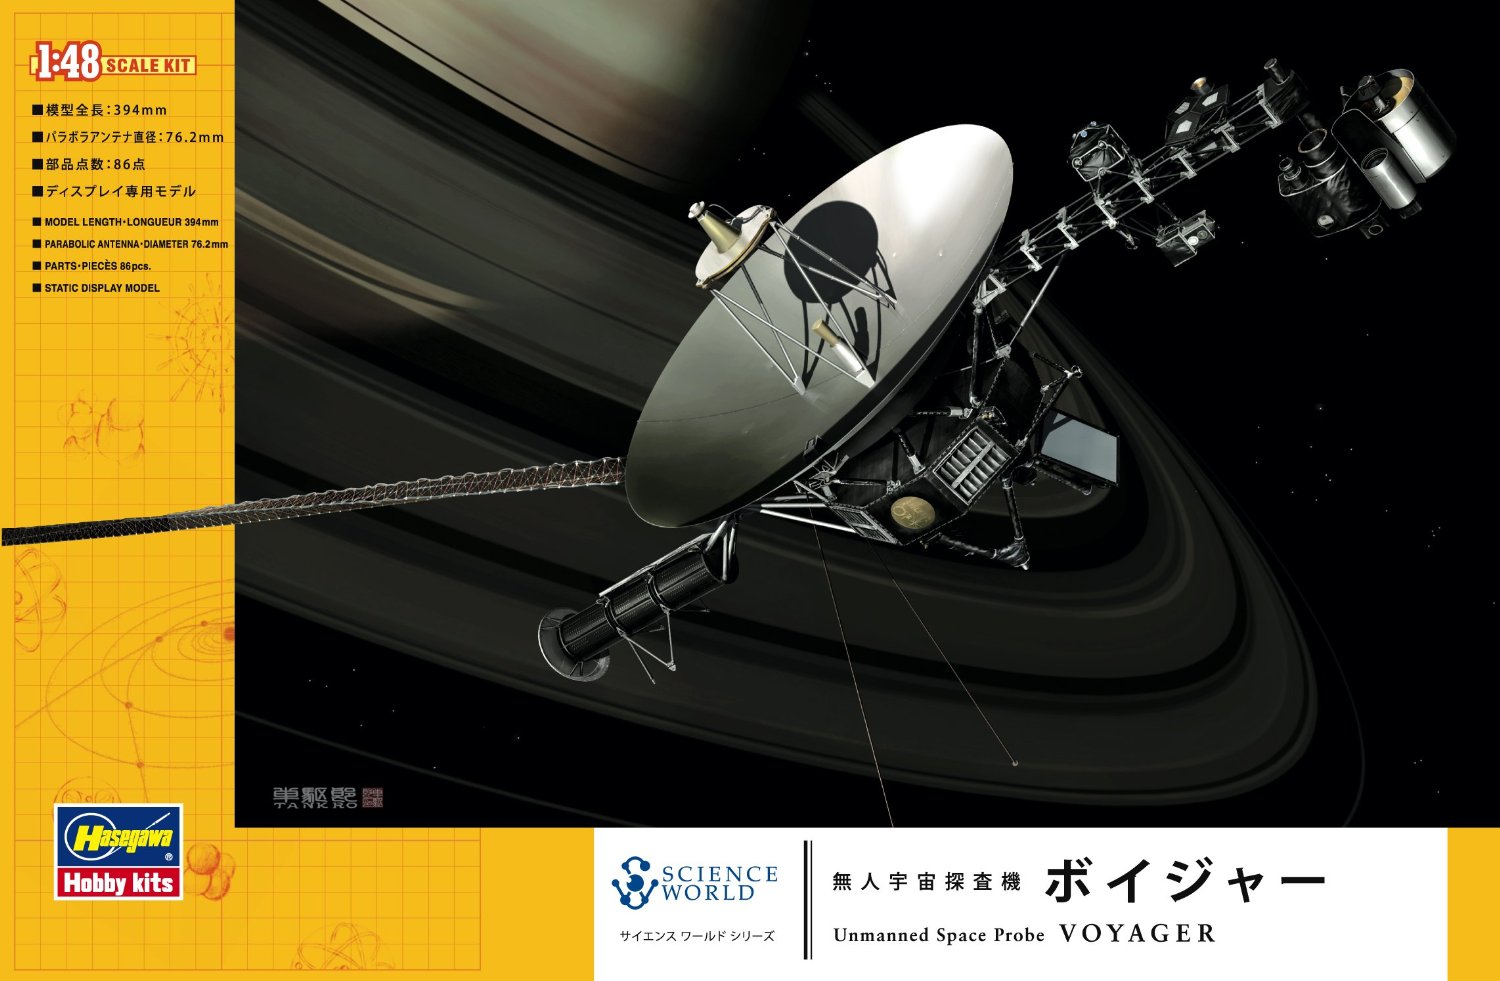 SW02 Unmanned Space Probe Voyager SW02